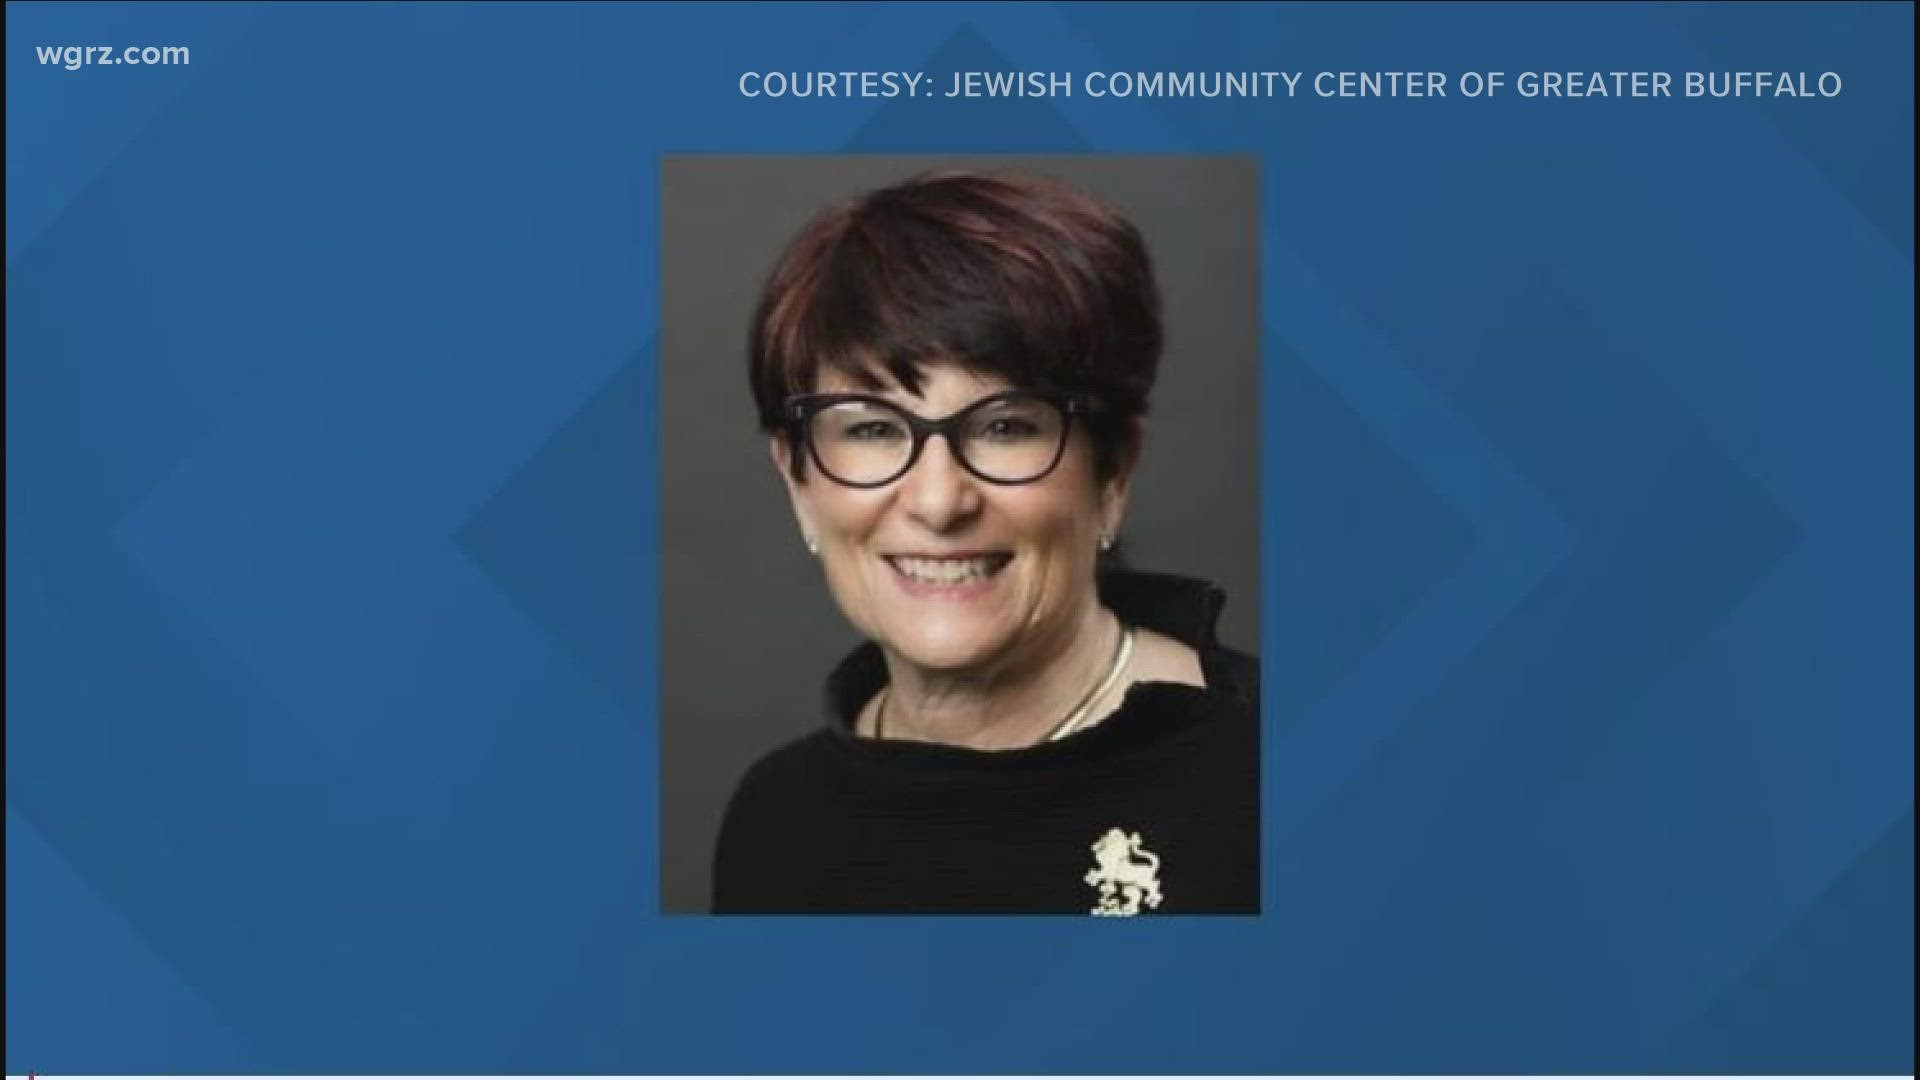 THE Jewish Community Center says she was involved in a car crash in South Carolina.